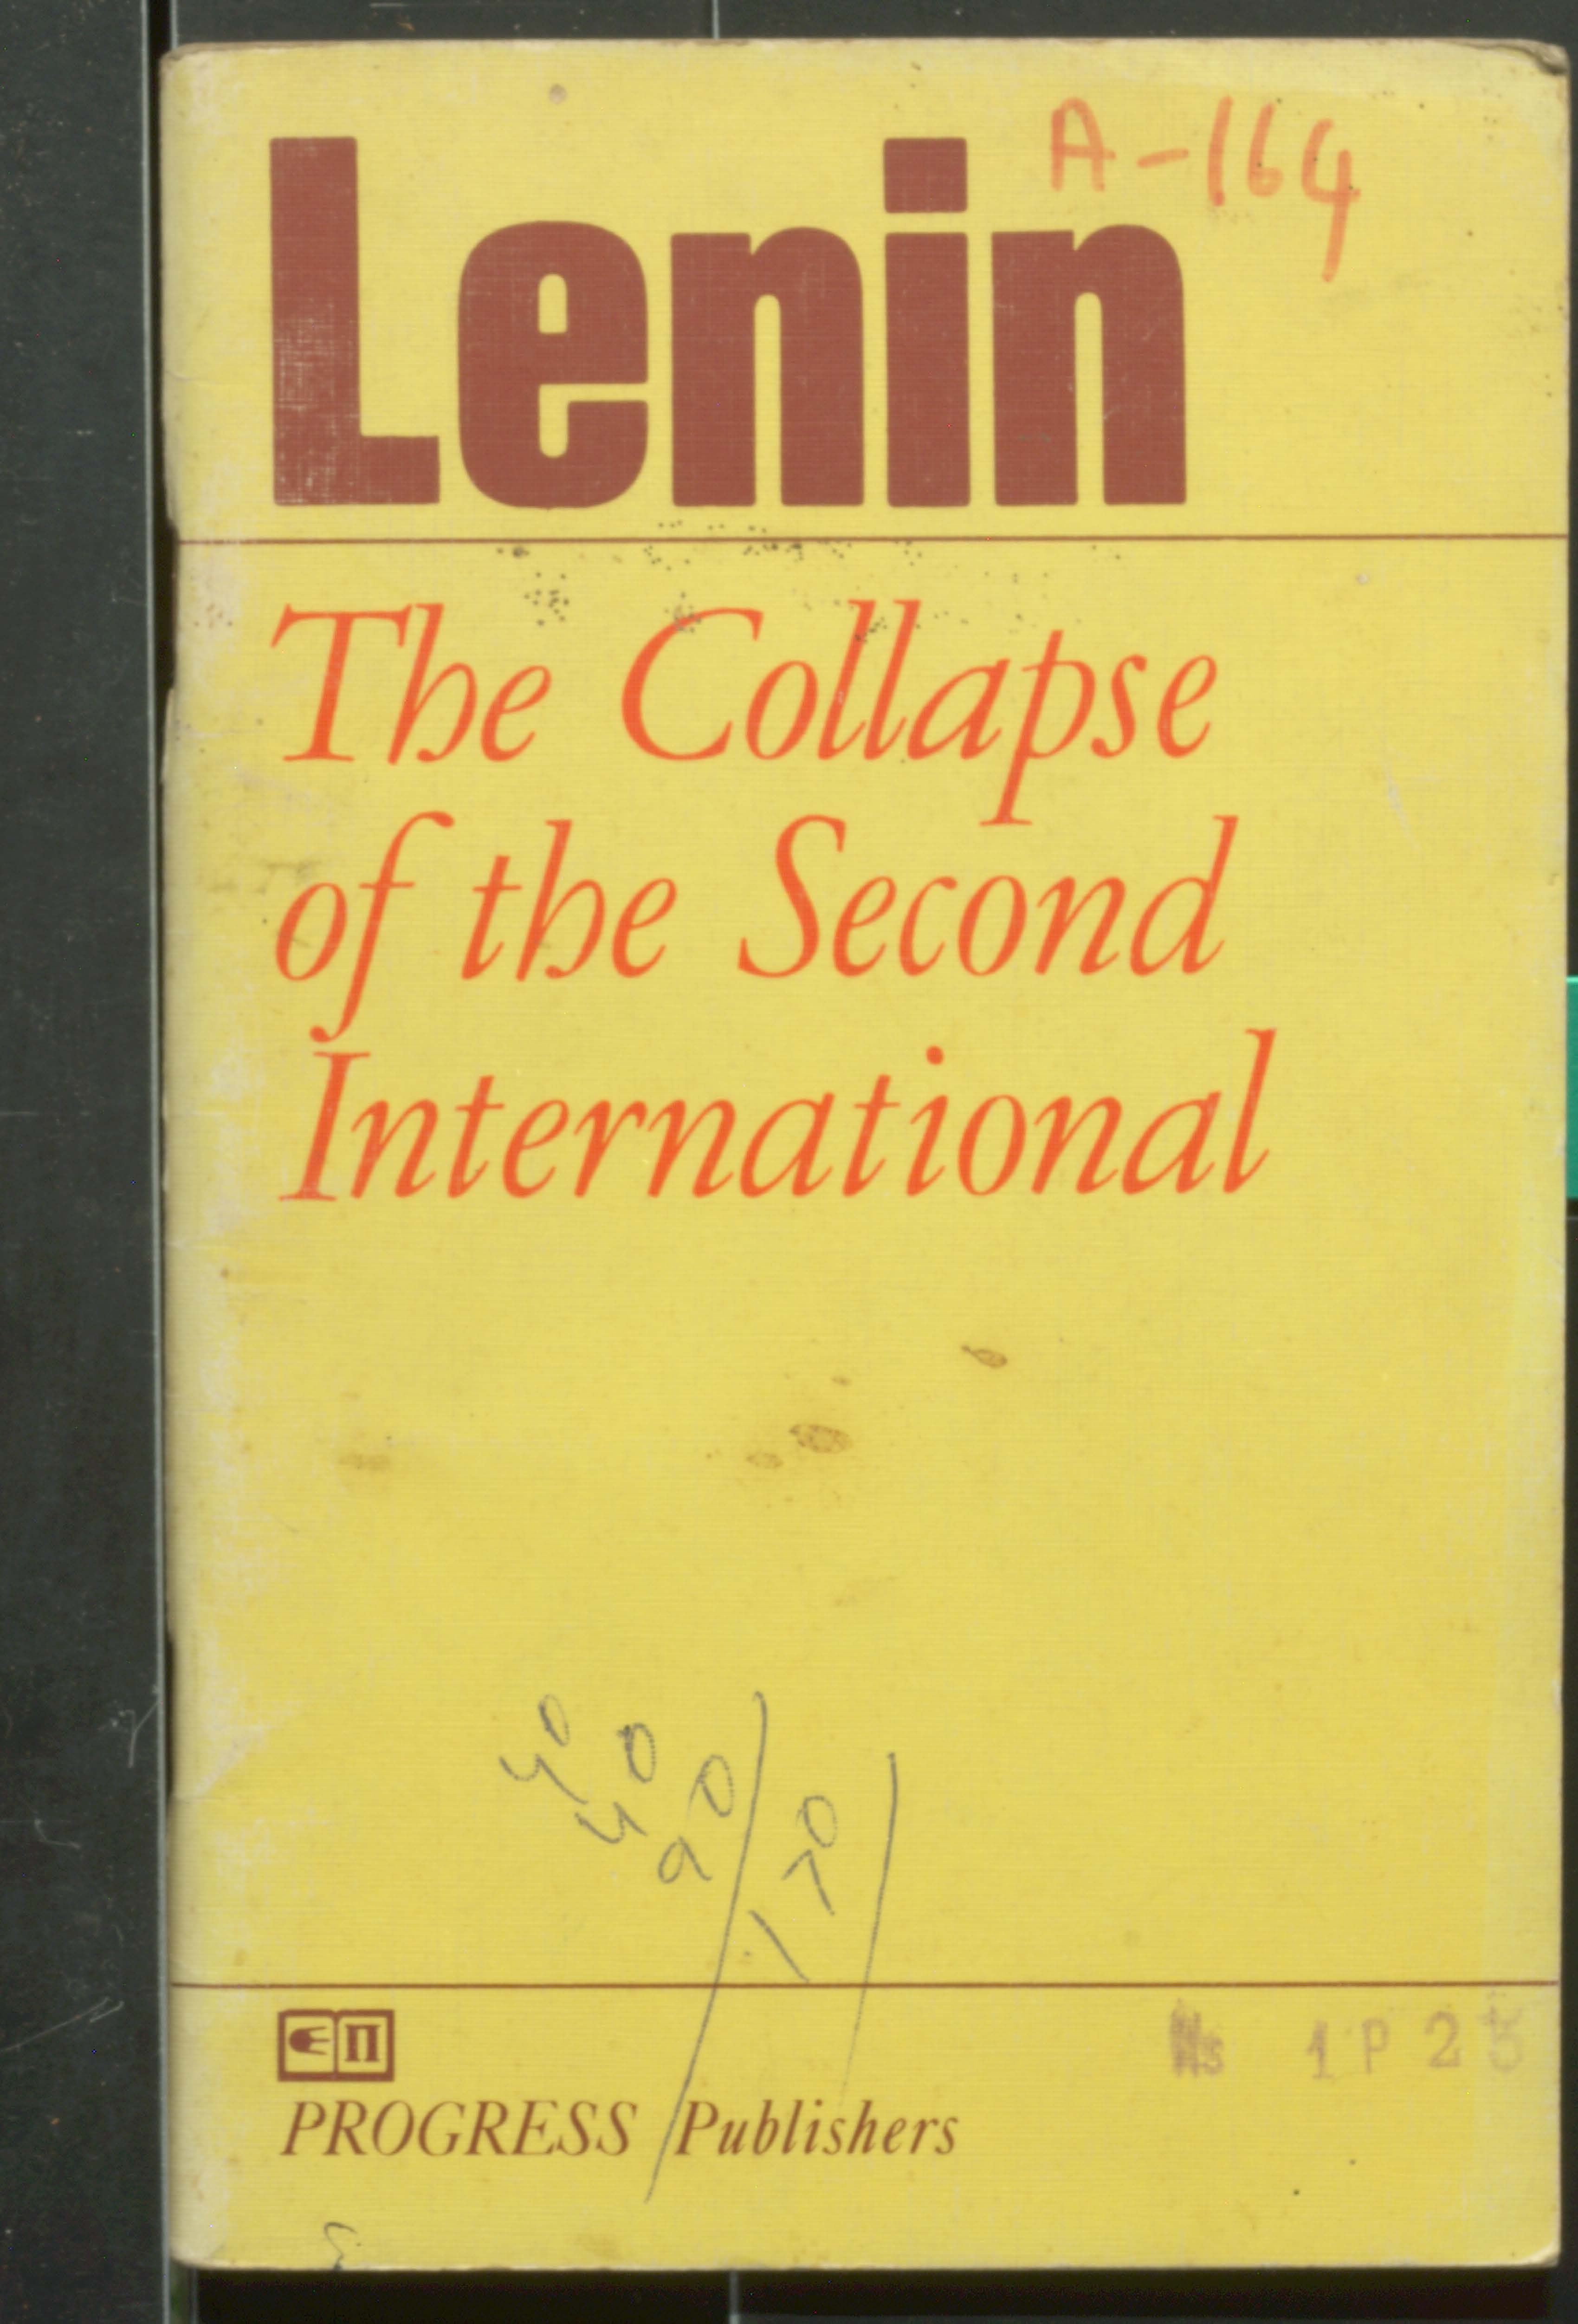 Lenin the collapse of the second international